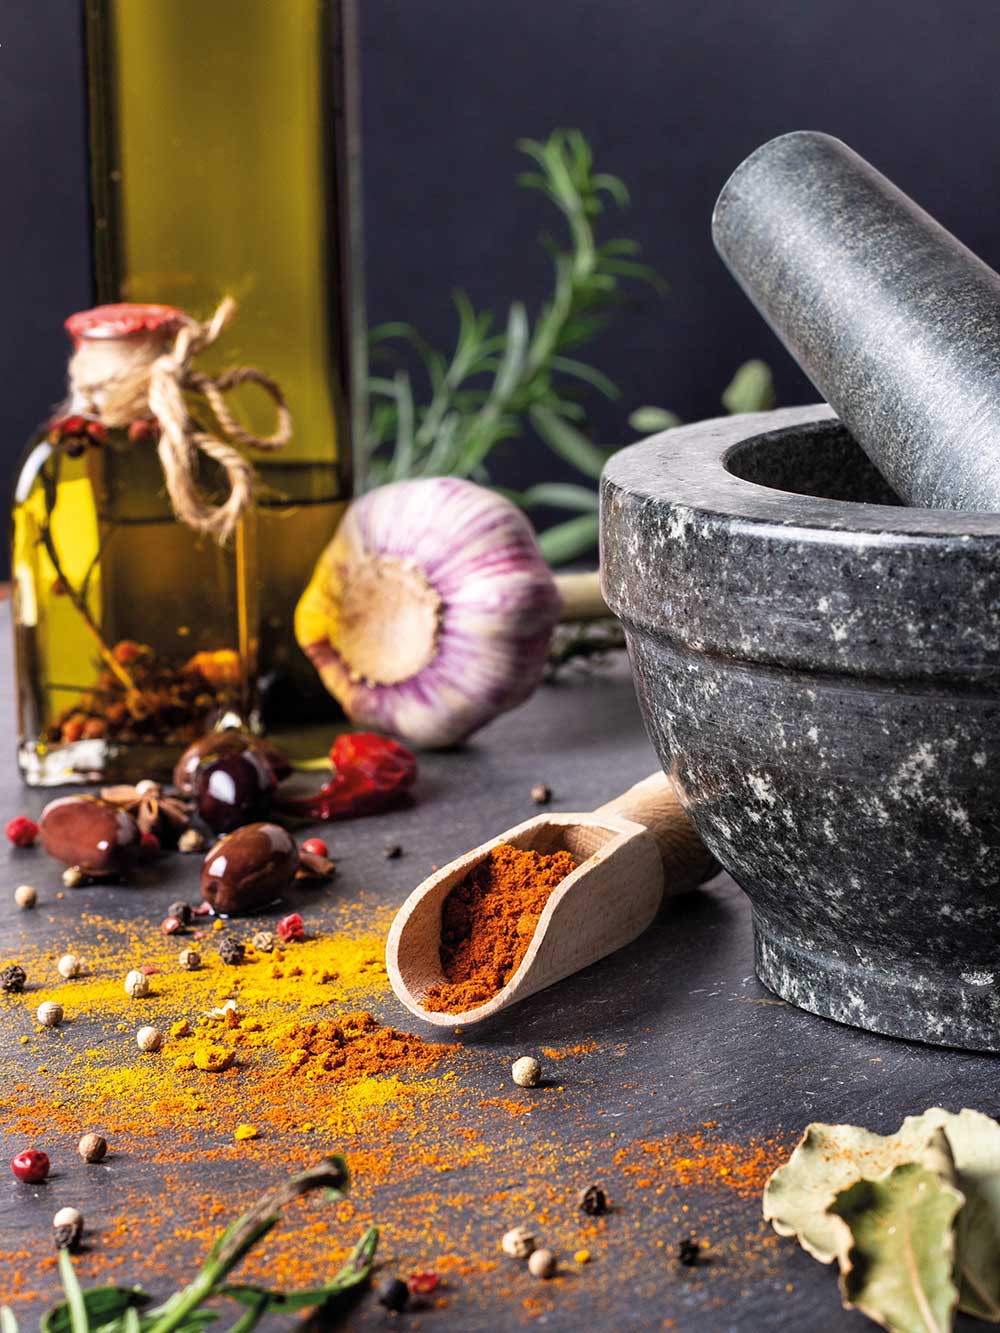 Spice up your food. Photo: Marie Grob/Unsplash